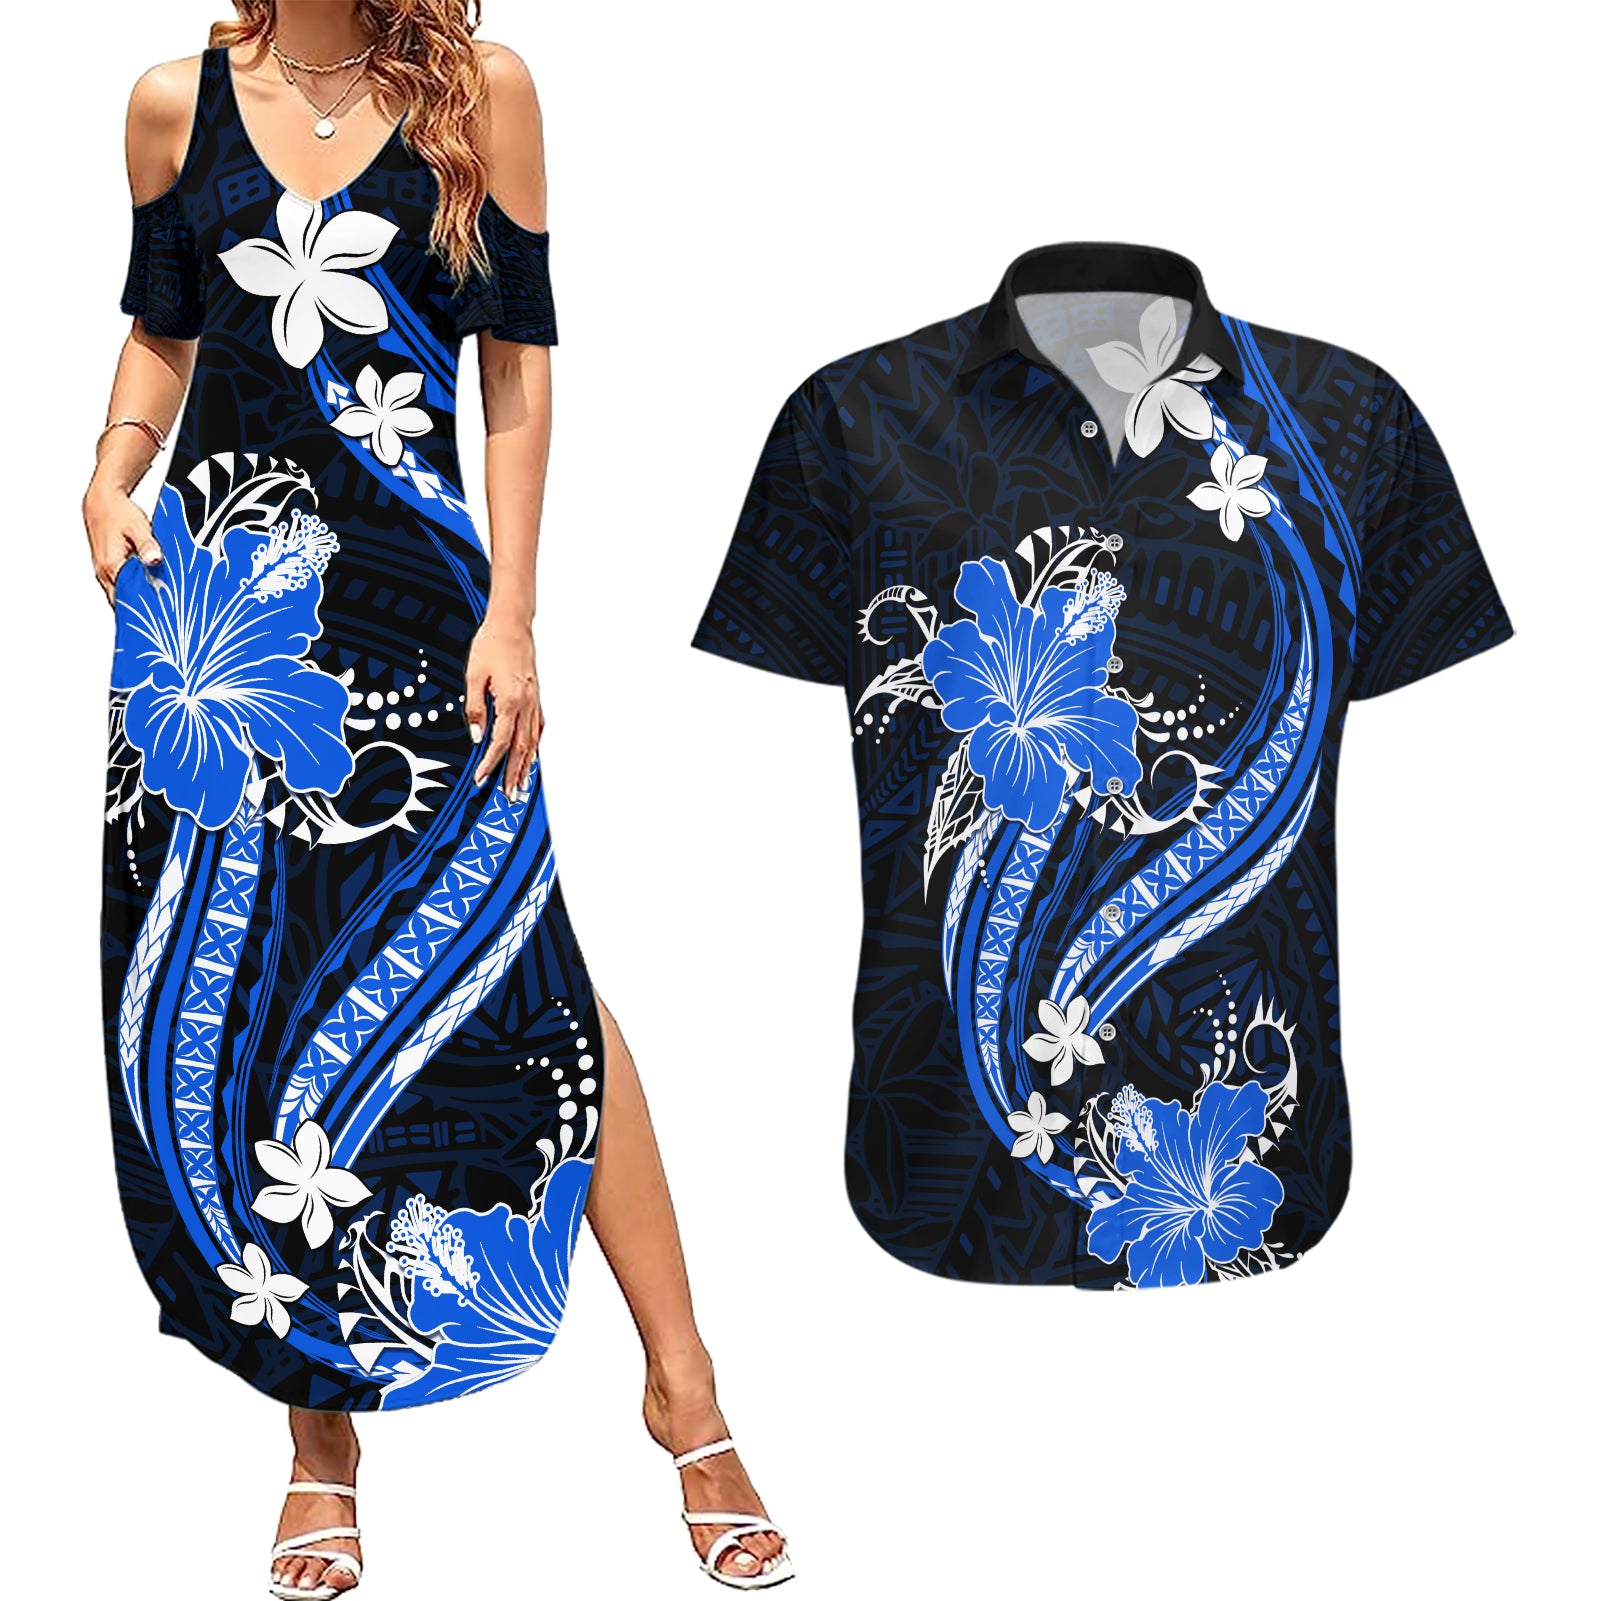 Blue Polynesian Pattern With Tropical Flowers Couples Matching Summer Maxi Dress and Hawaiian Shirt LT05 Blue - Polynesian Pride